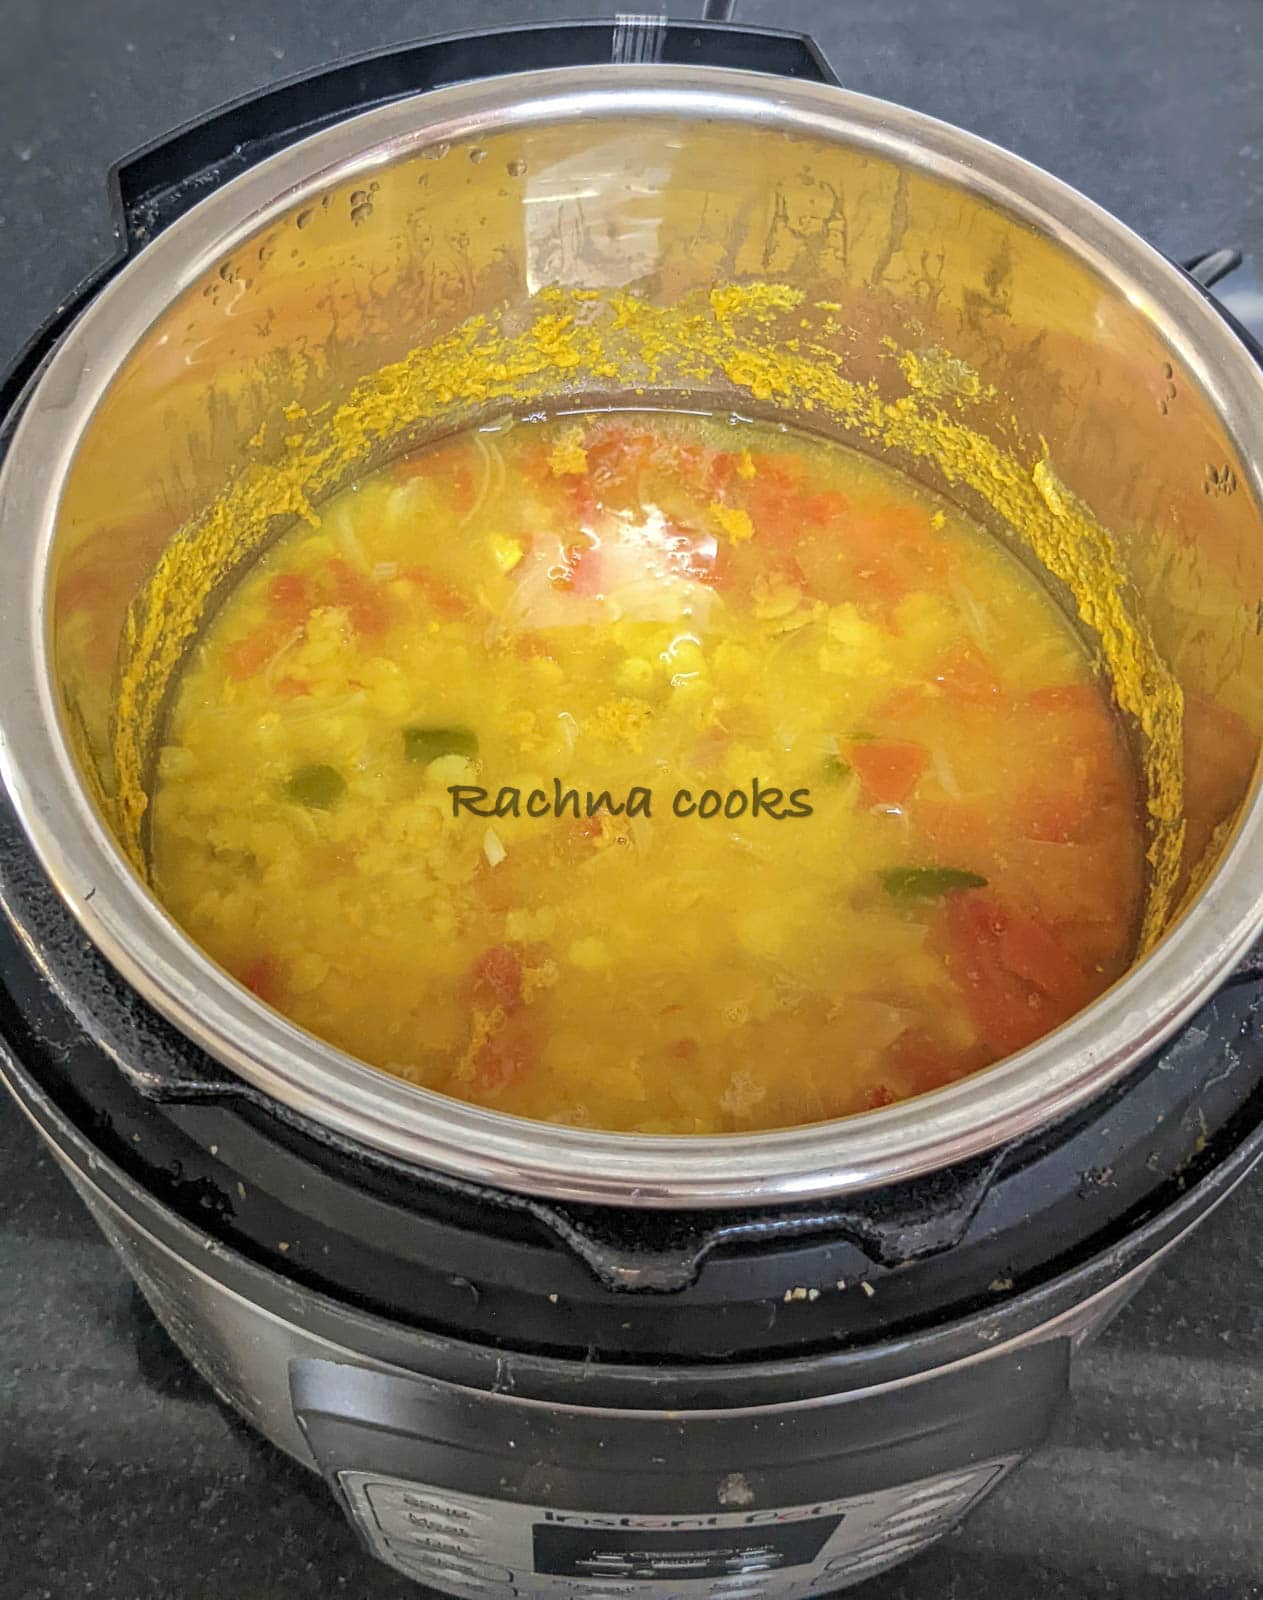 Toor dal after cooking in instant pot.